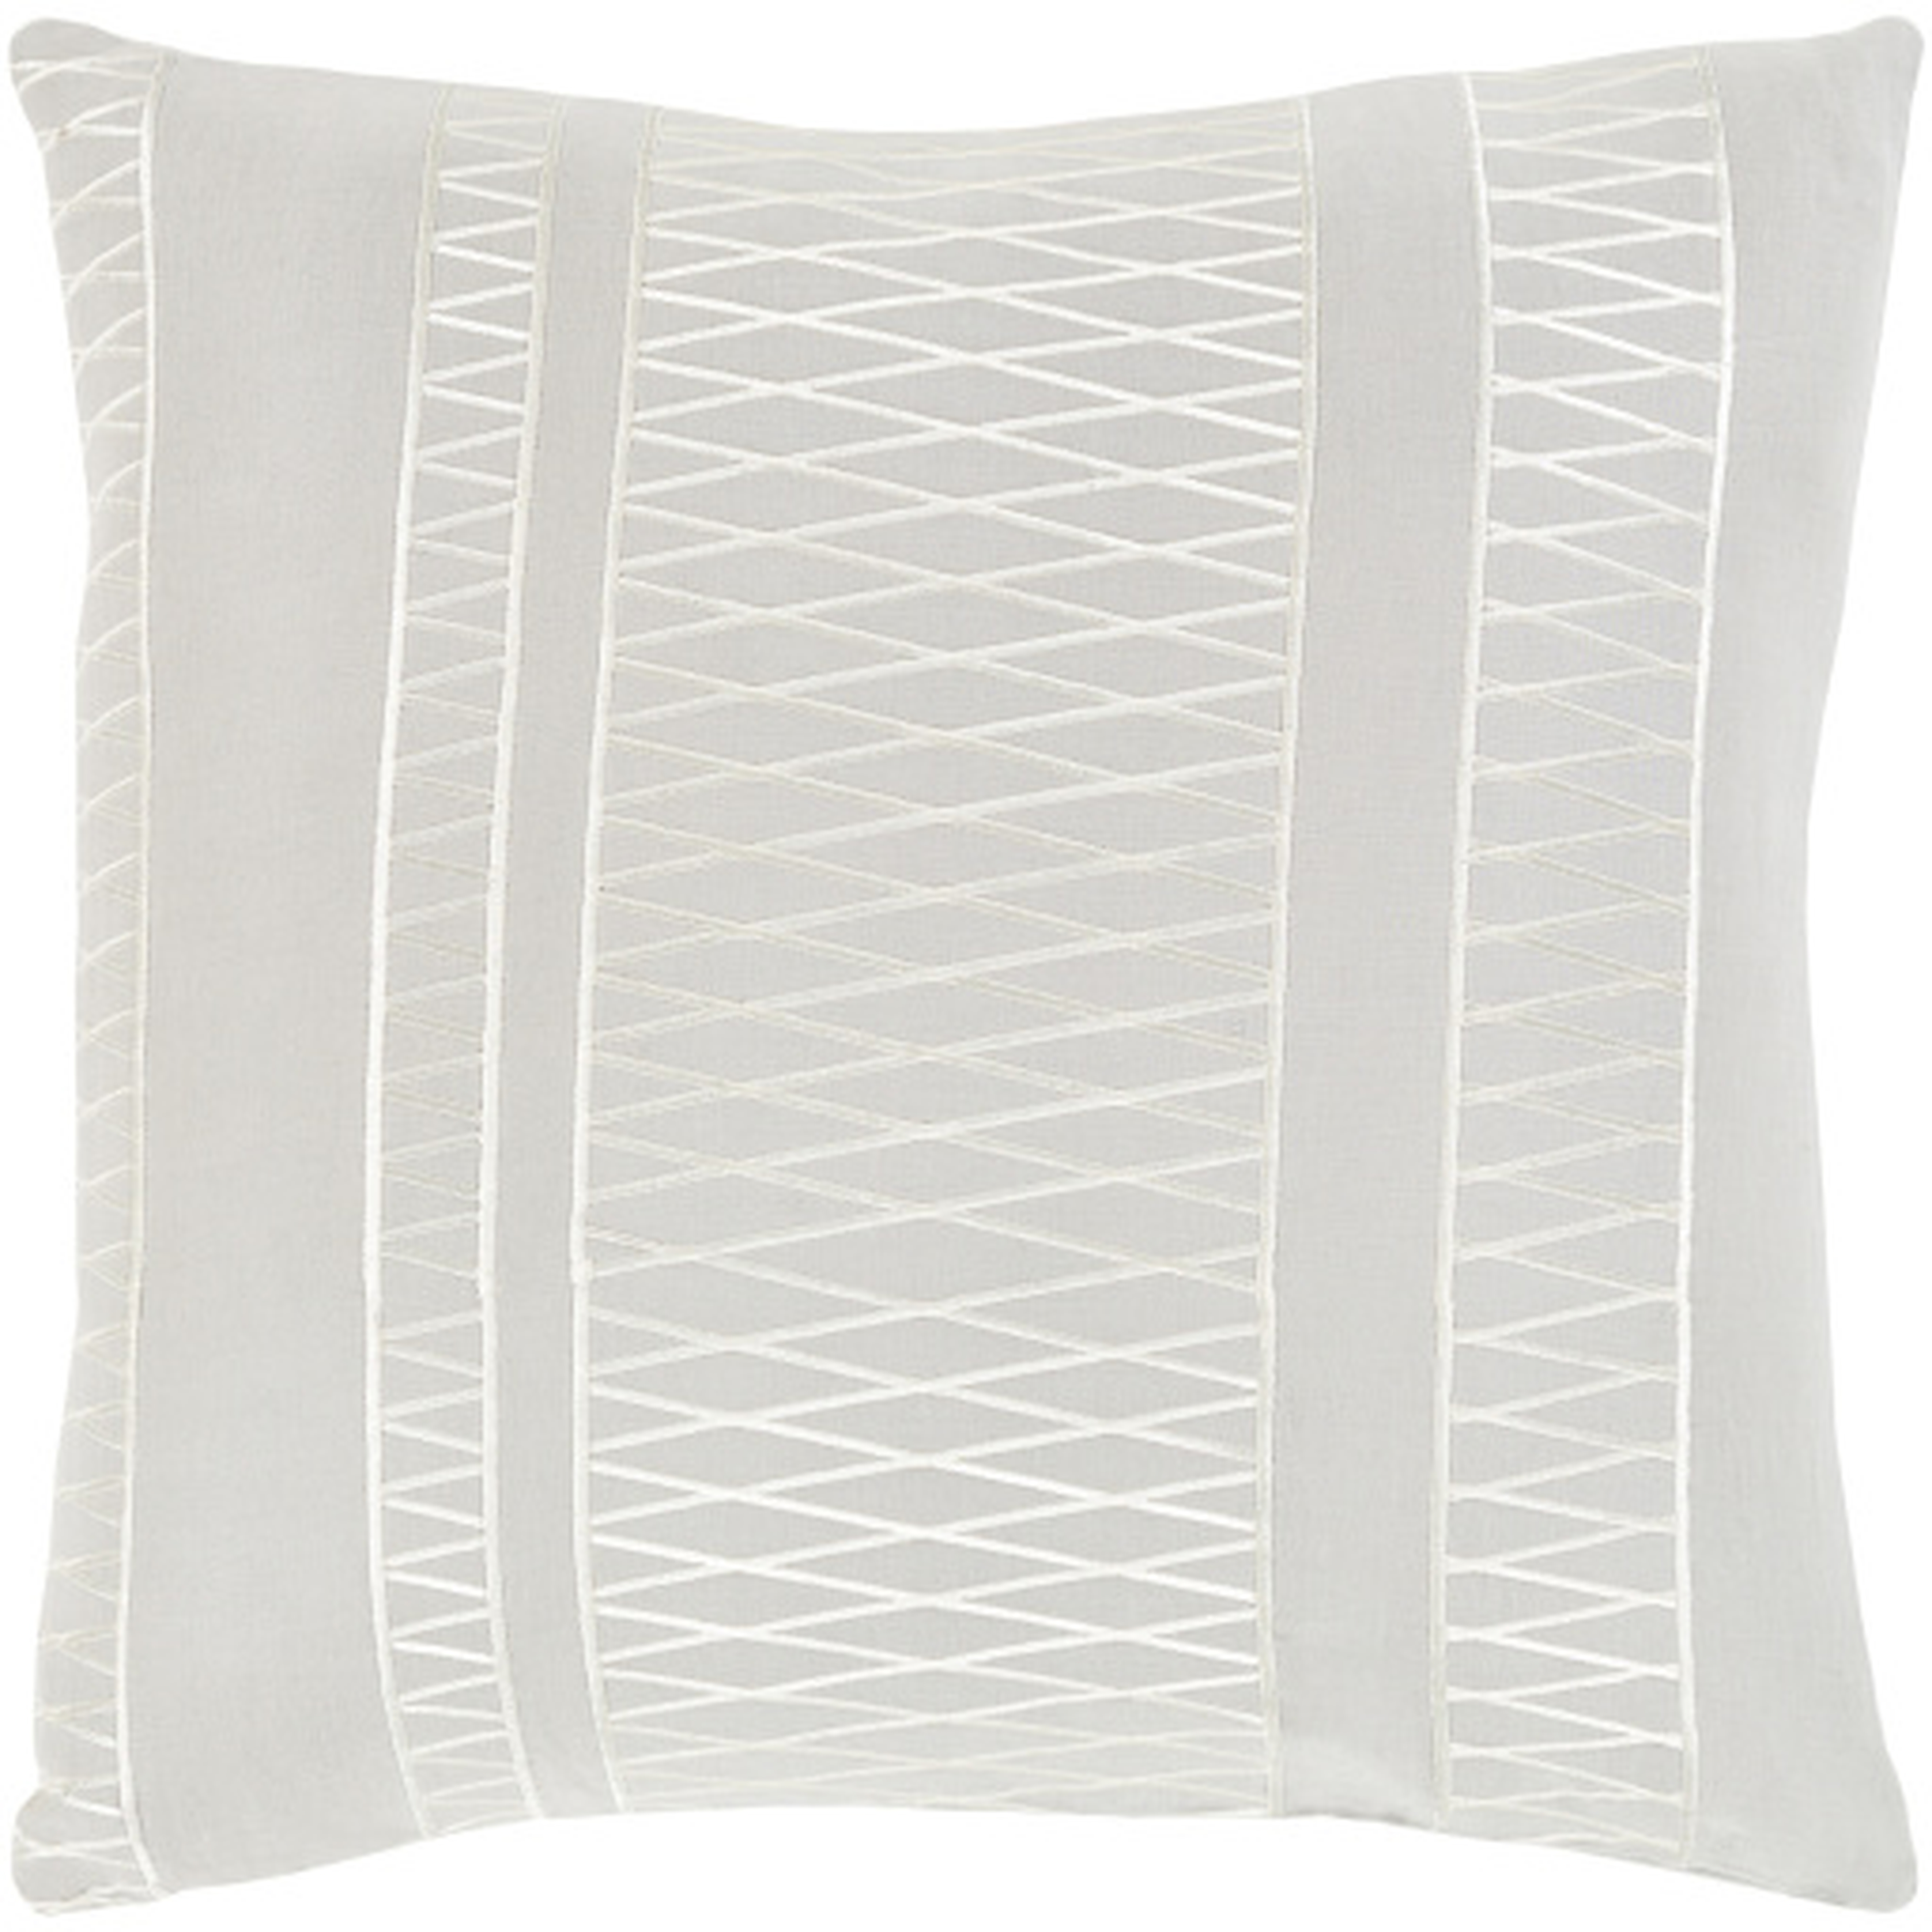 Cora Throw Pillow, 18" x 18", with poly insert - Surya